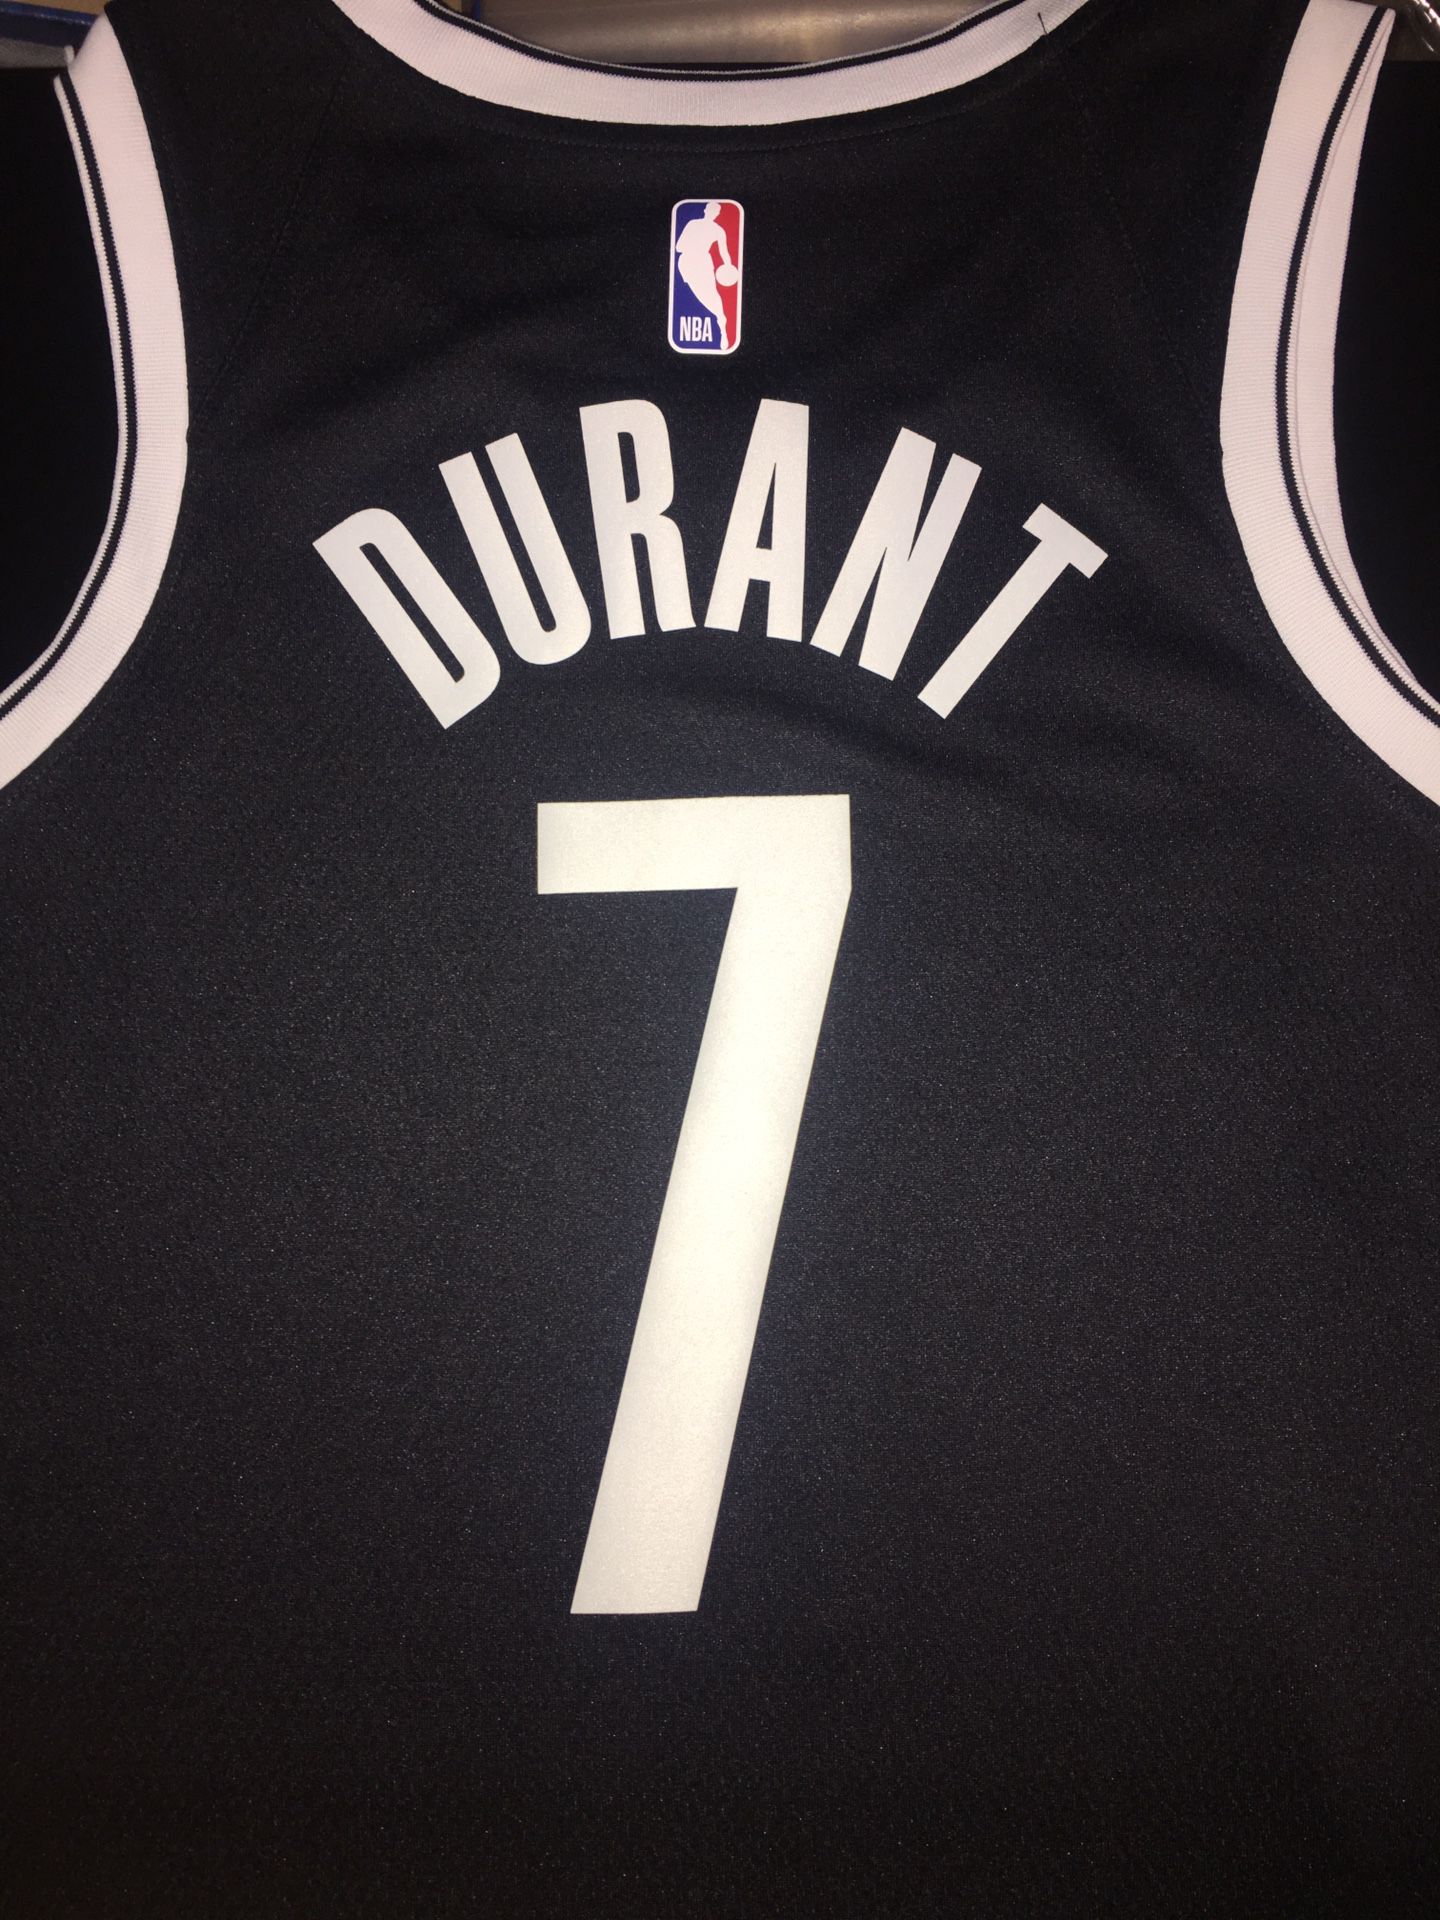 NBA Brooklyn Nets Kevin Durant Jersey for Sale in Irwindale, CA - OfferUp